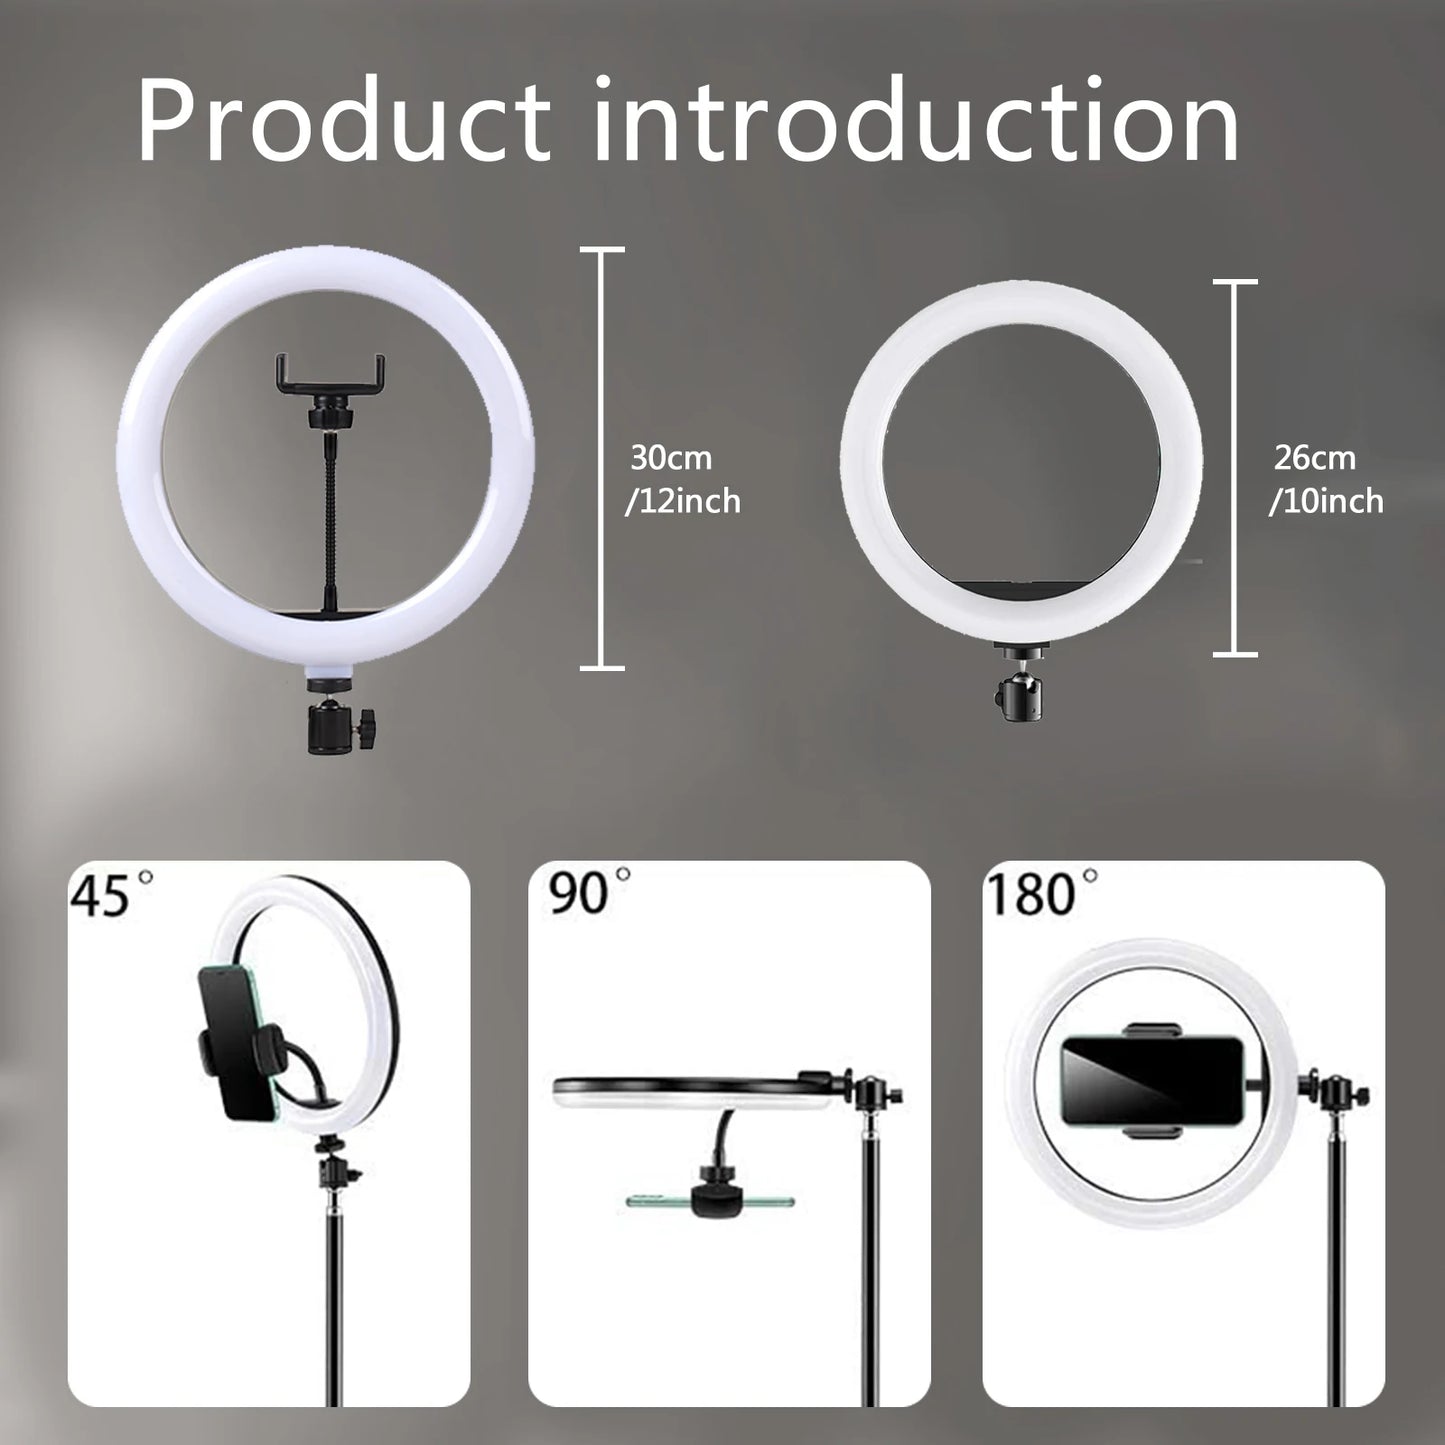 10" 26cm LED Selfie Ring Light Photography Video Light RingLight Phone Stand Tripod Fill Light Dimmable Lamp Trepied Streaming